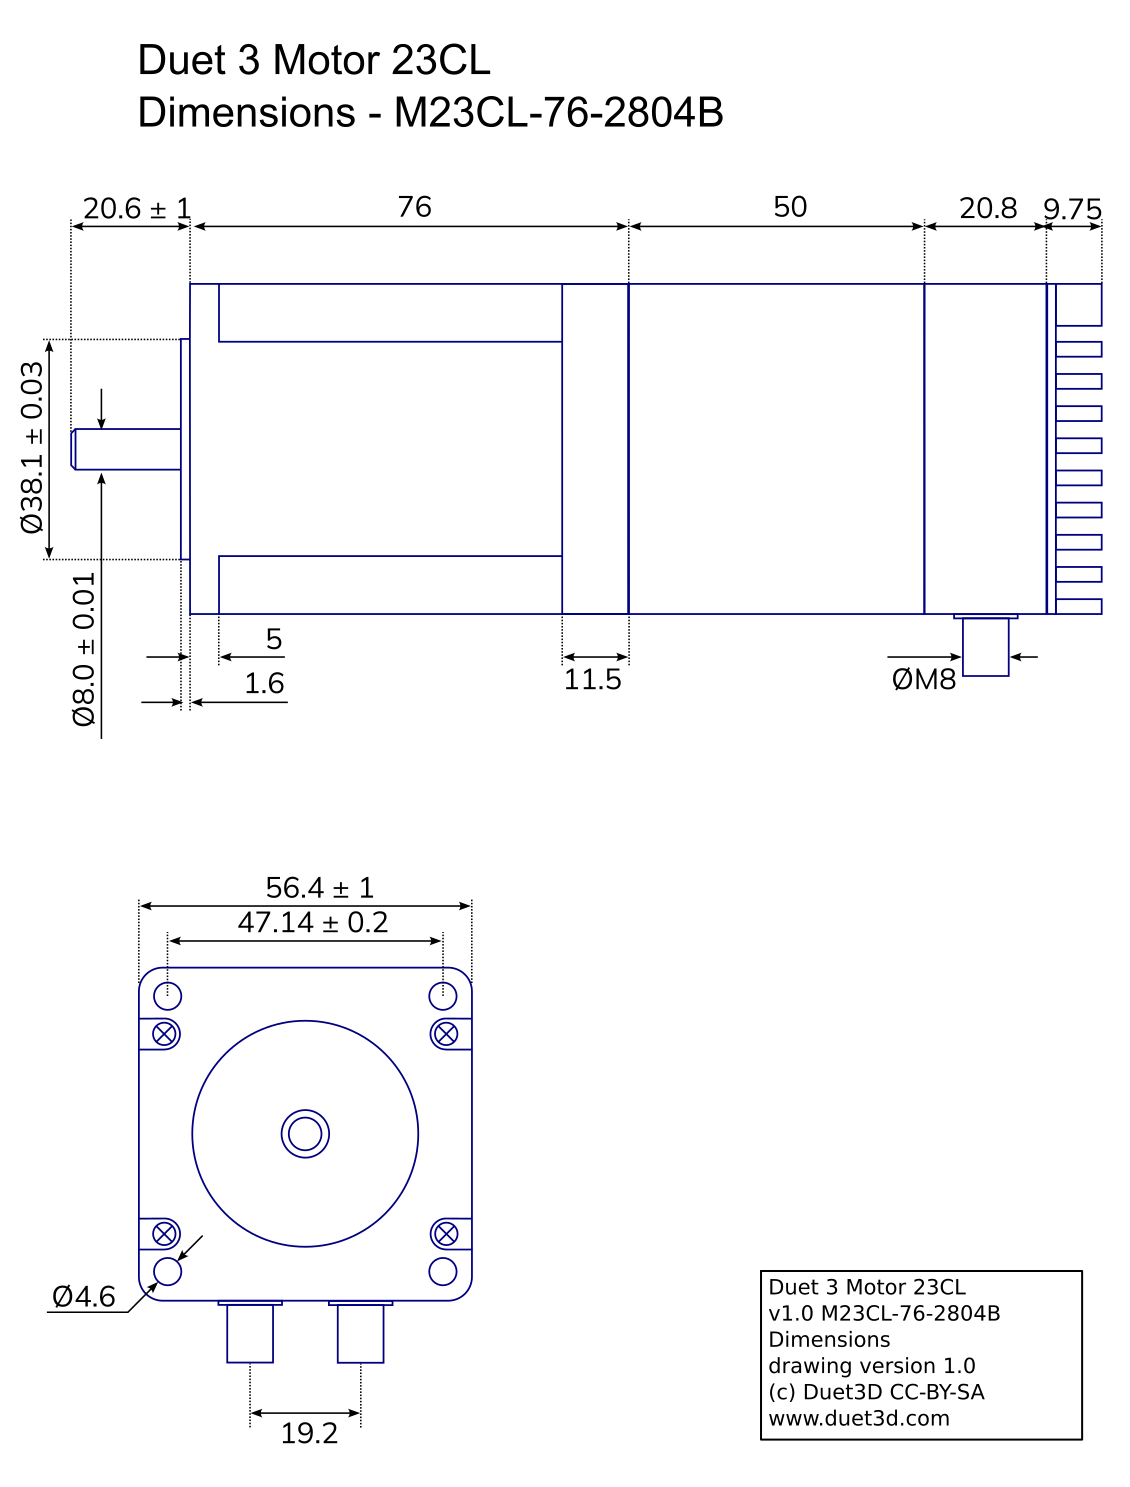 Image showing the key dimensions of the Duet 3 motor 23CL v1.0 with brake - M23CL-76-2804B